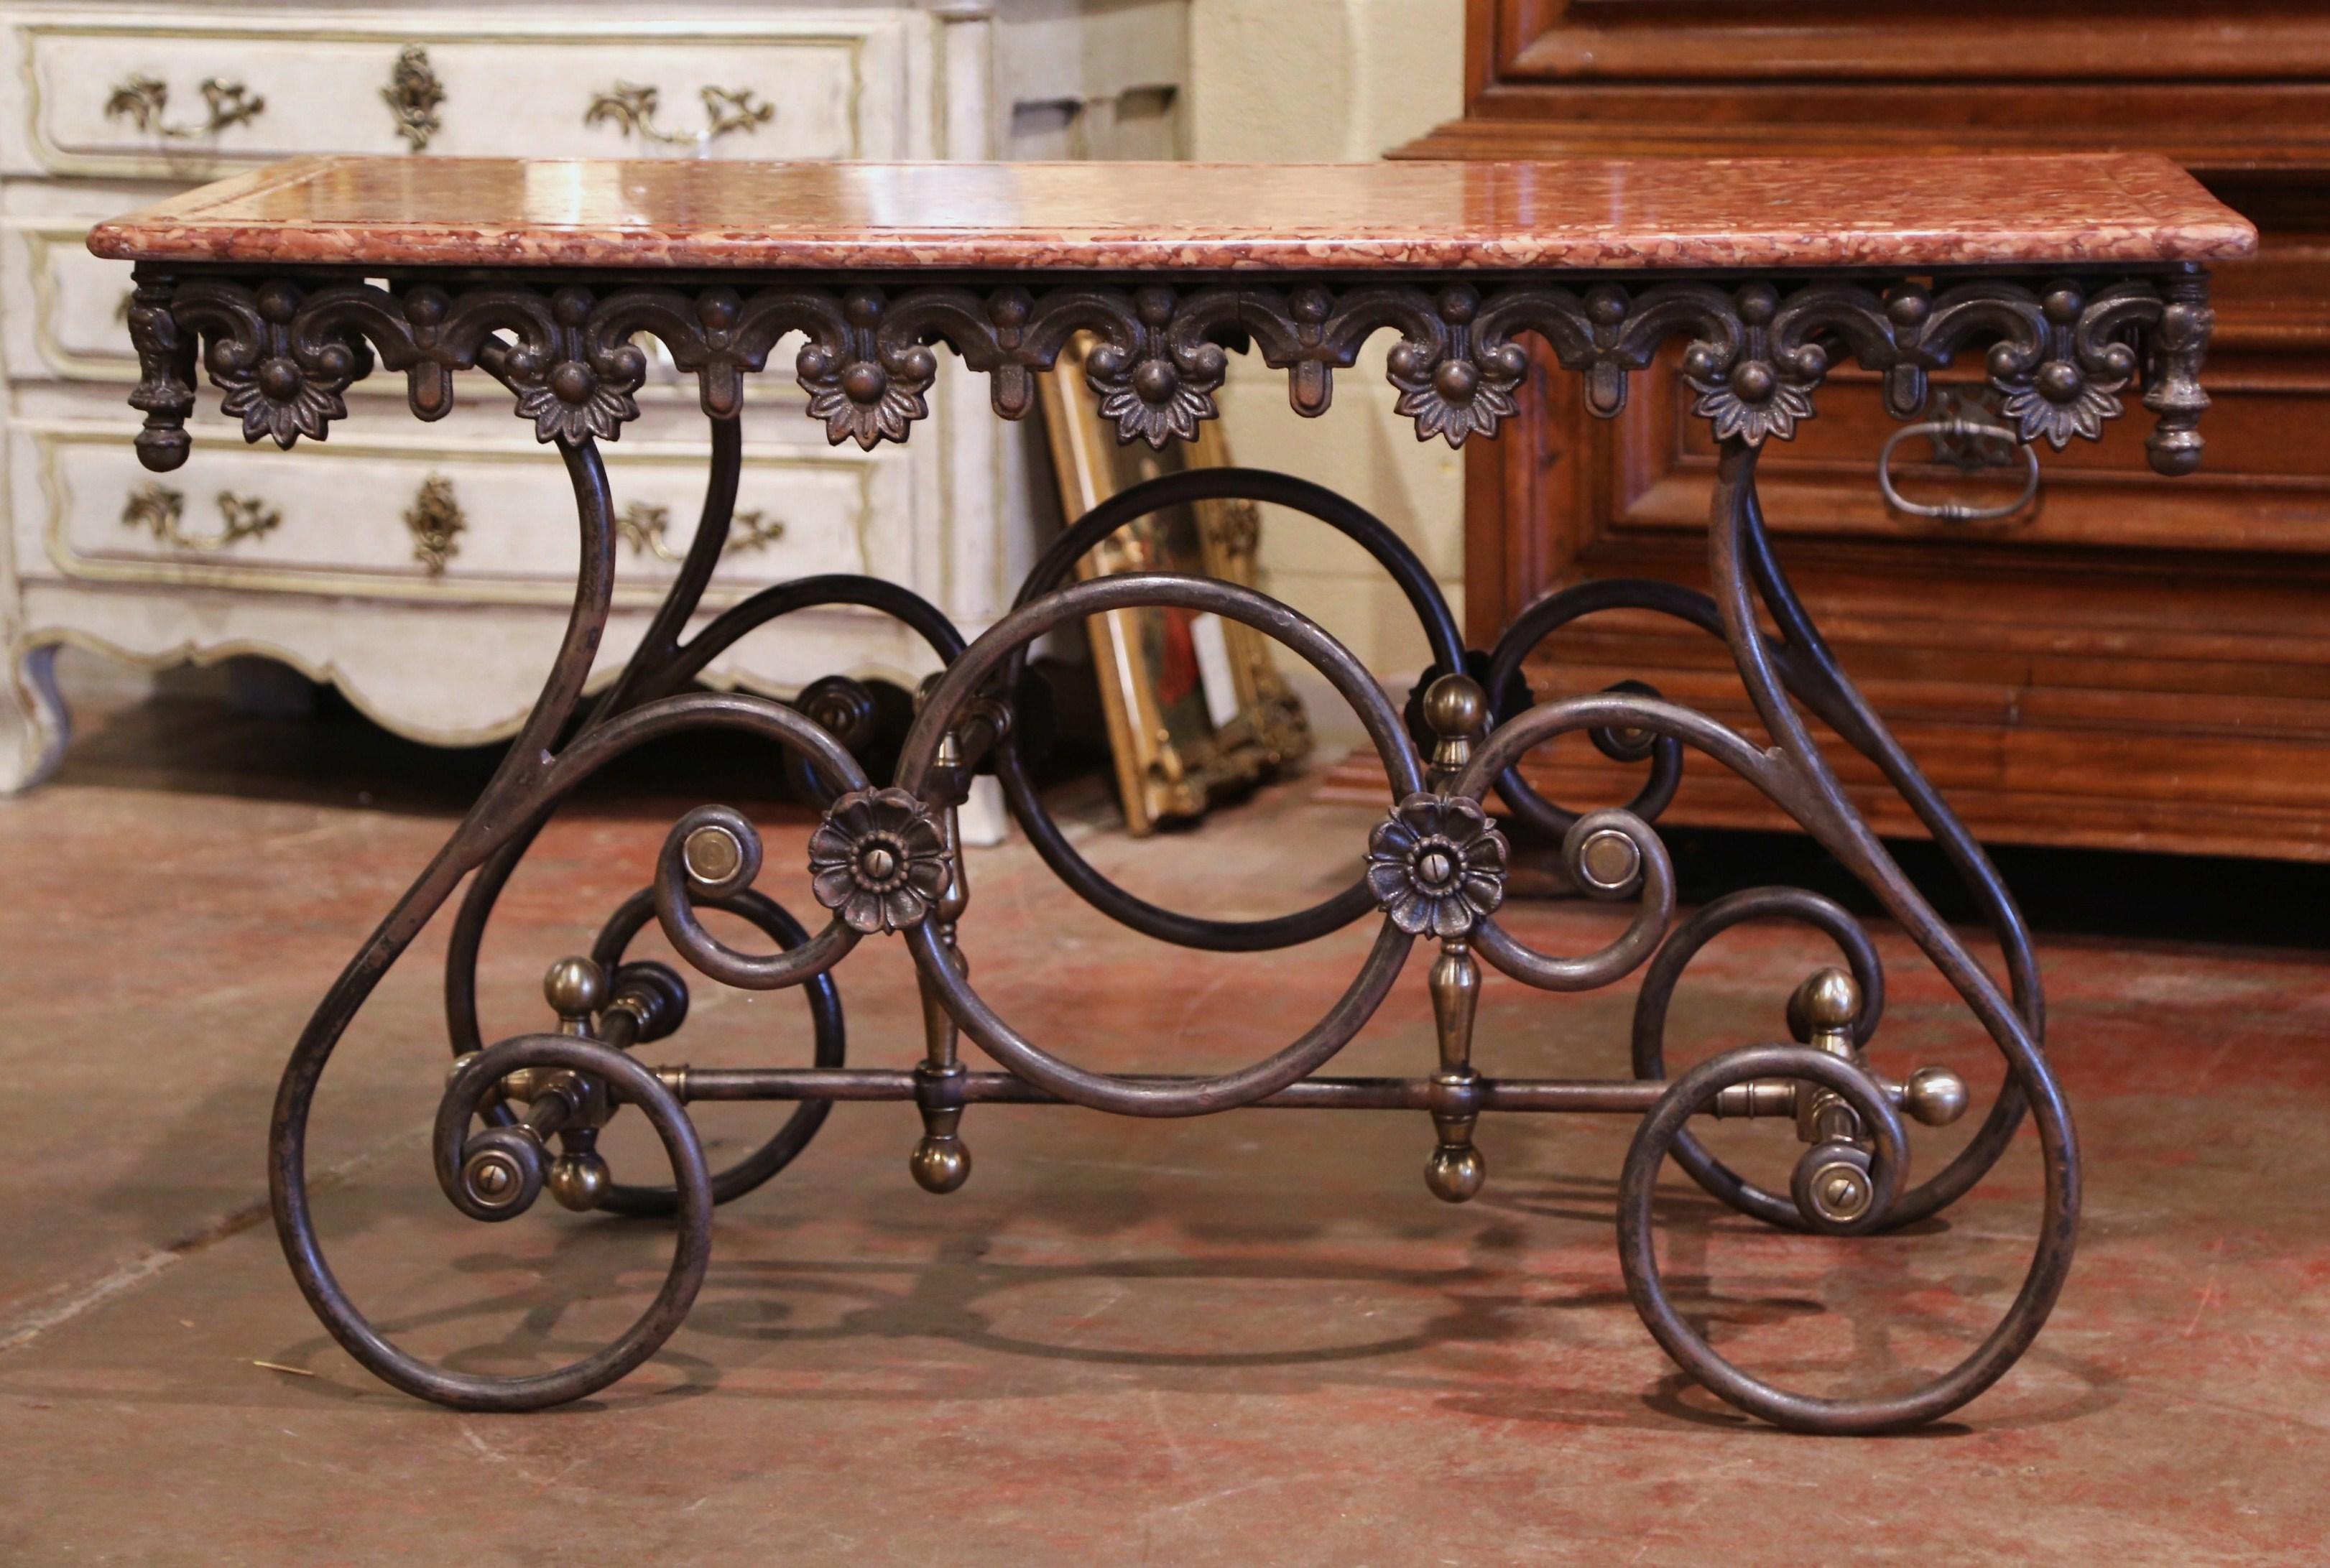 Crafted in France circa 2000, this long and narrow butcher table (or pastry table) would add the ideal amount of surface space to any kitchen. The table has a polished iron finish and features a scalloped apron with intricate metal work and